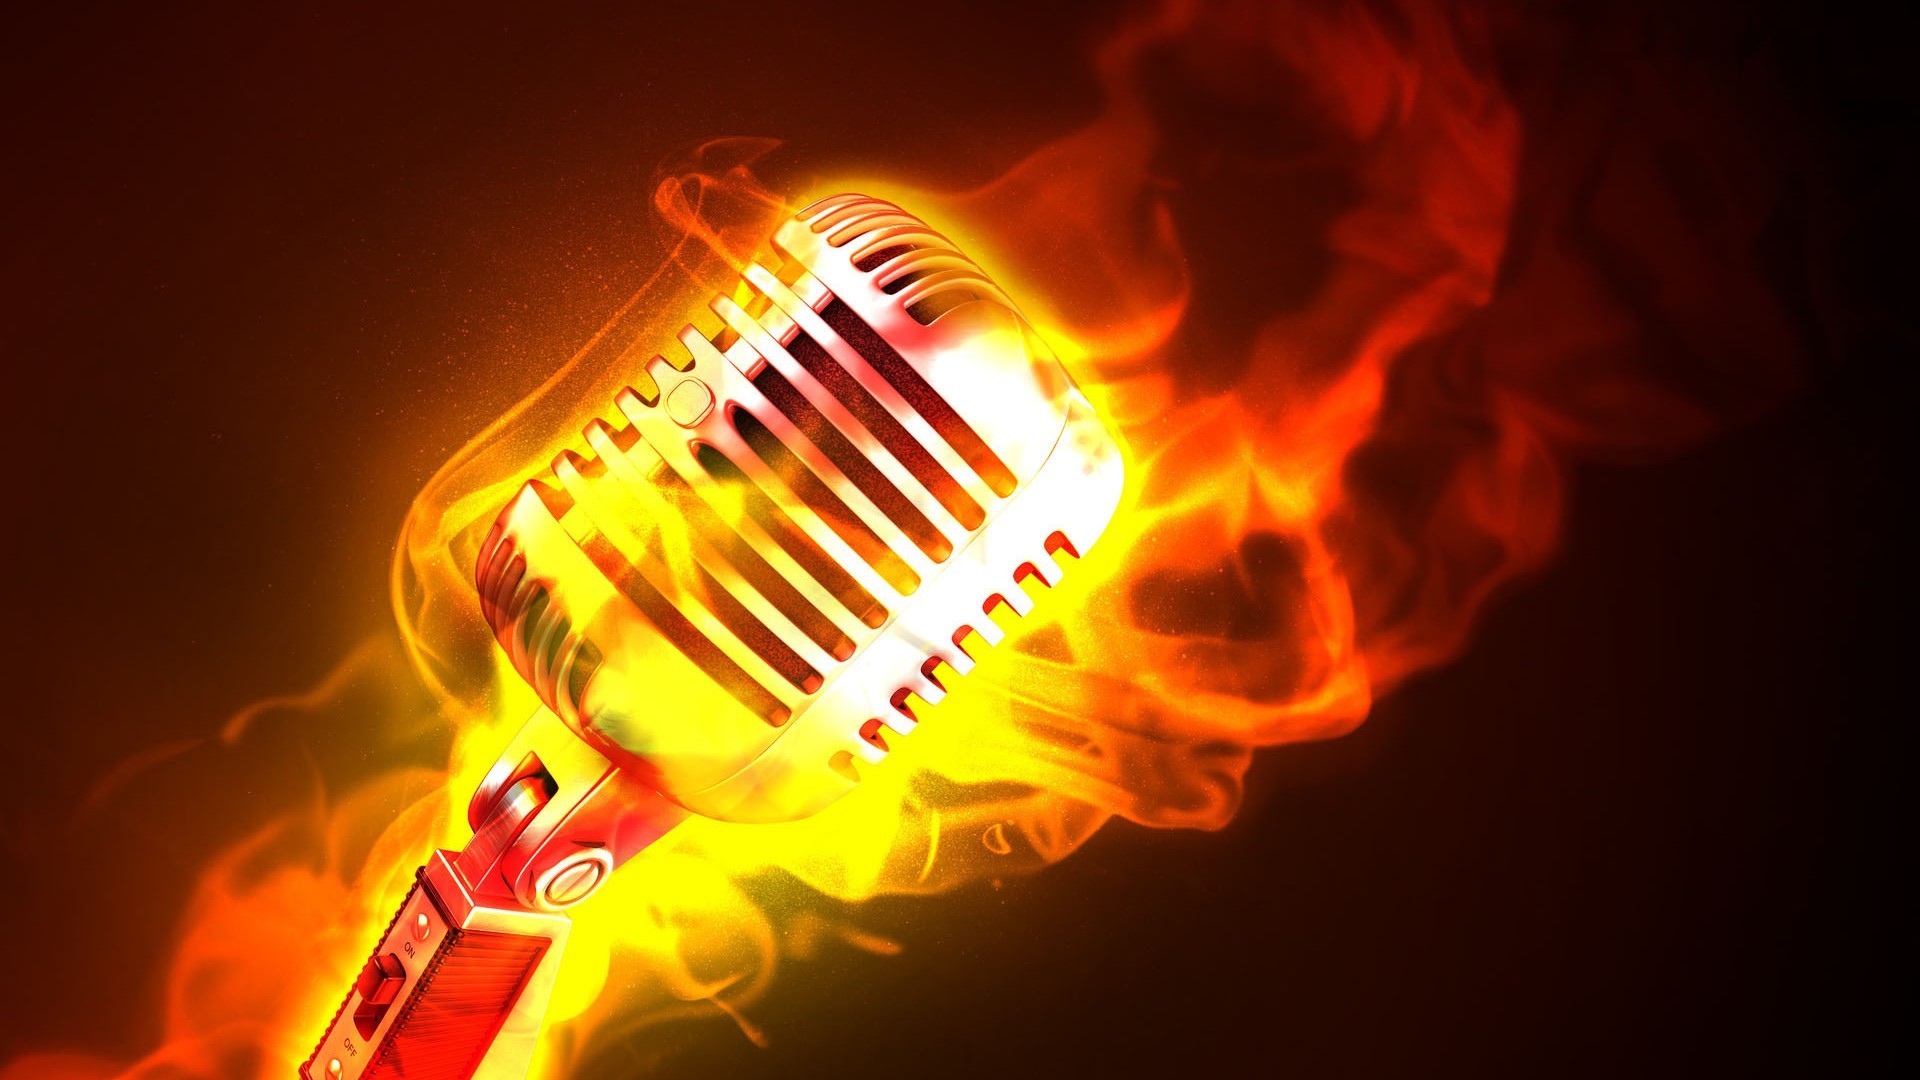 1920x1080 Awesome Microphone Wallpaper